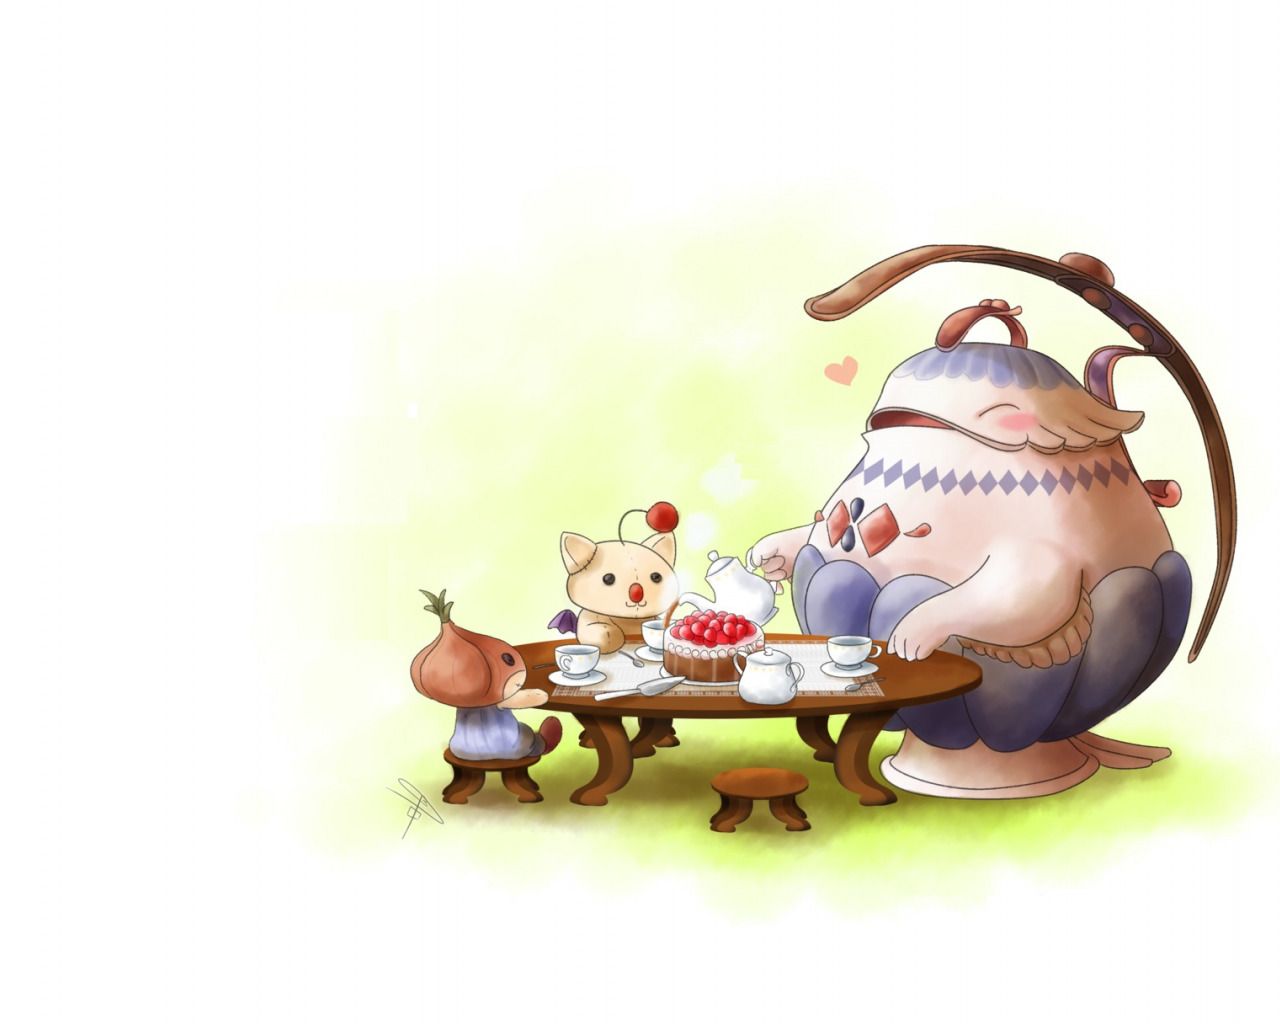 Download wallpaper art, the tea party, treat, guests, Teapo of Mana by ClaraKerber, section other in resolution 1280x1024